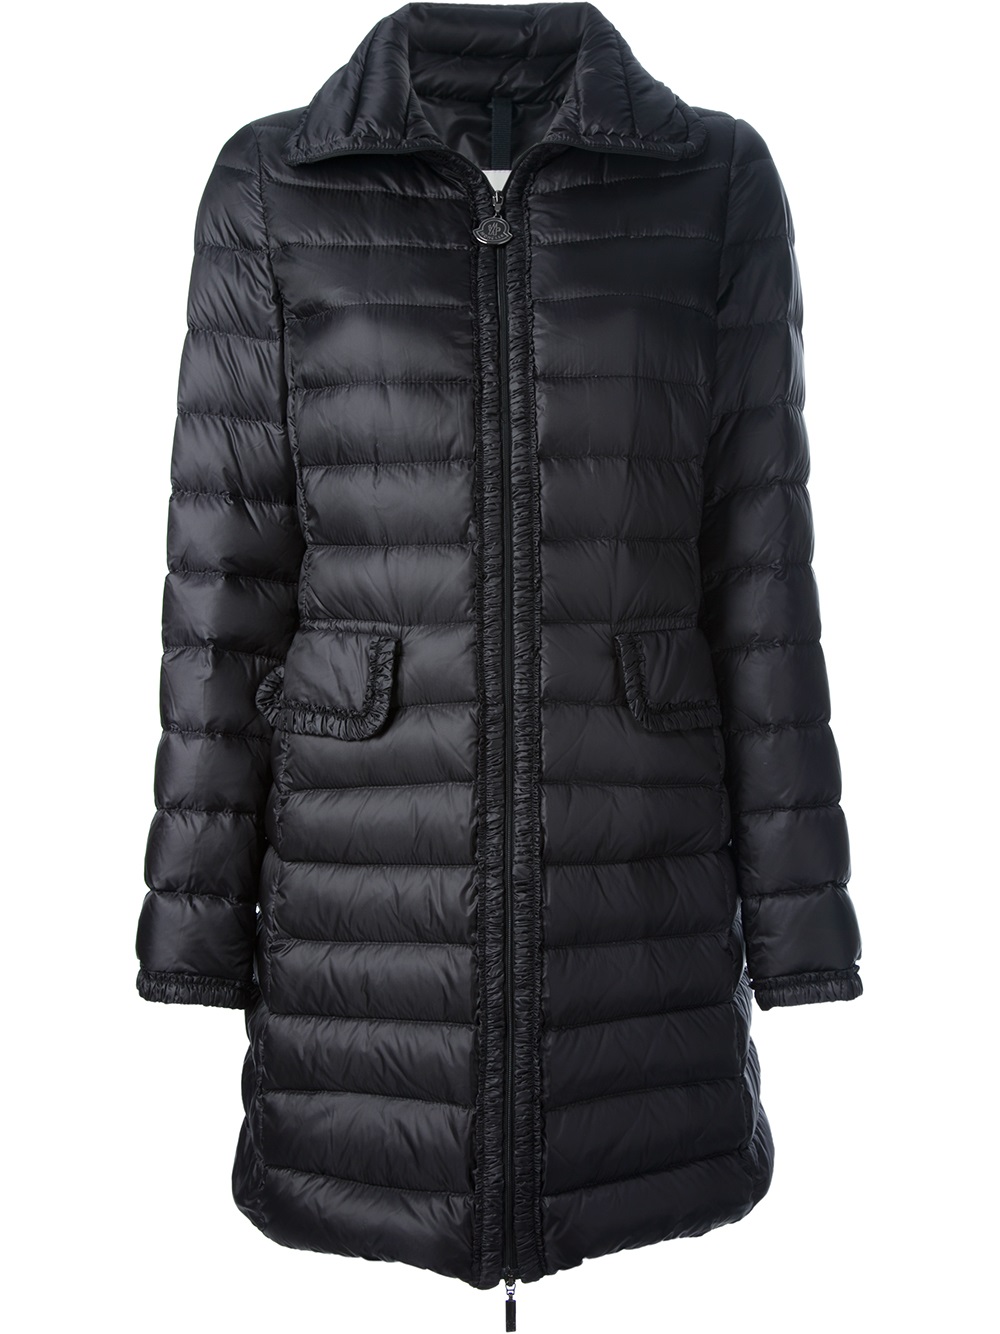 Lyst - Moncler Caped Padded Jacket in Black